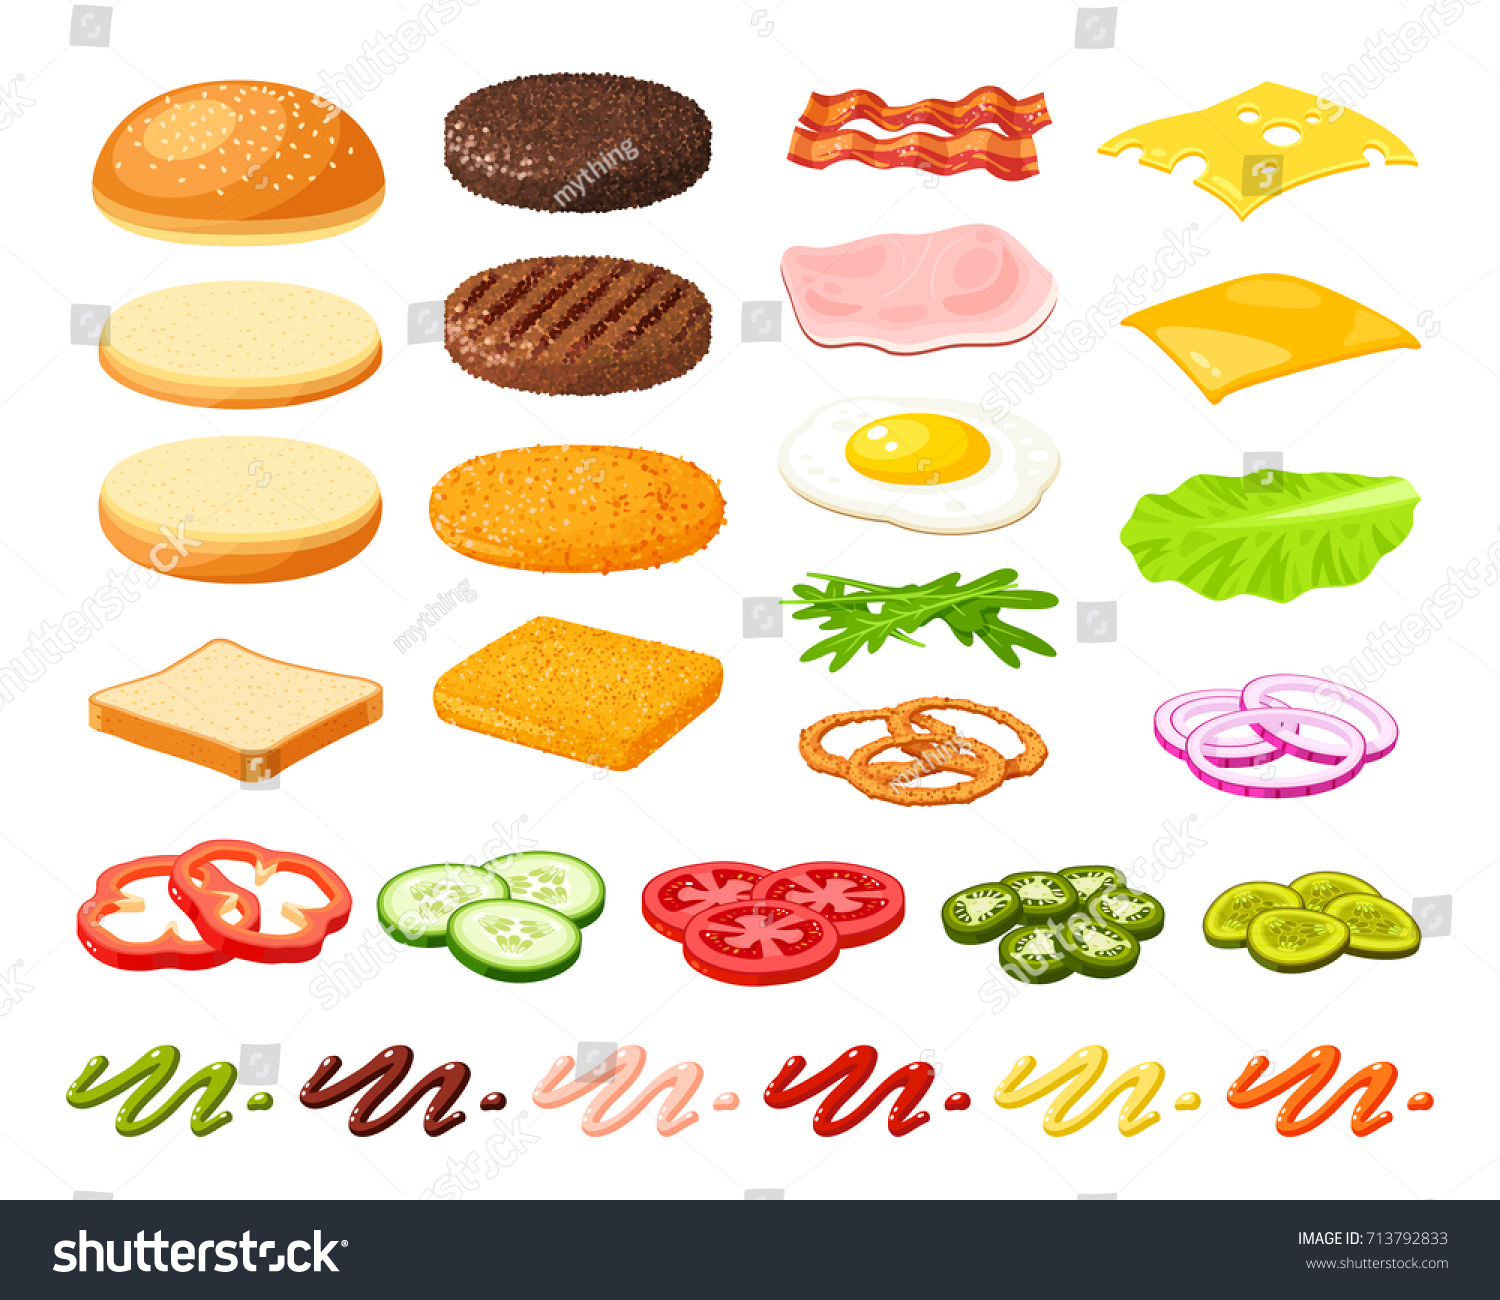 SVG of Set of ingredients for burger and sandwich . Sliced veggies, bun, cutlet, sauce. Vector illustration cartoon flat icon collection isolated on white. svg